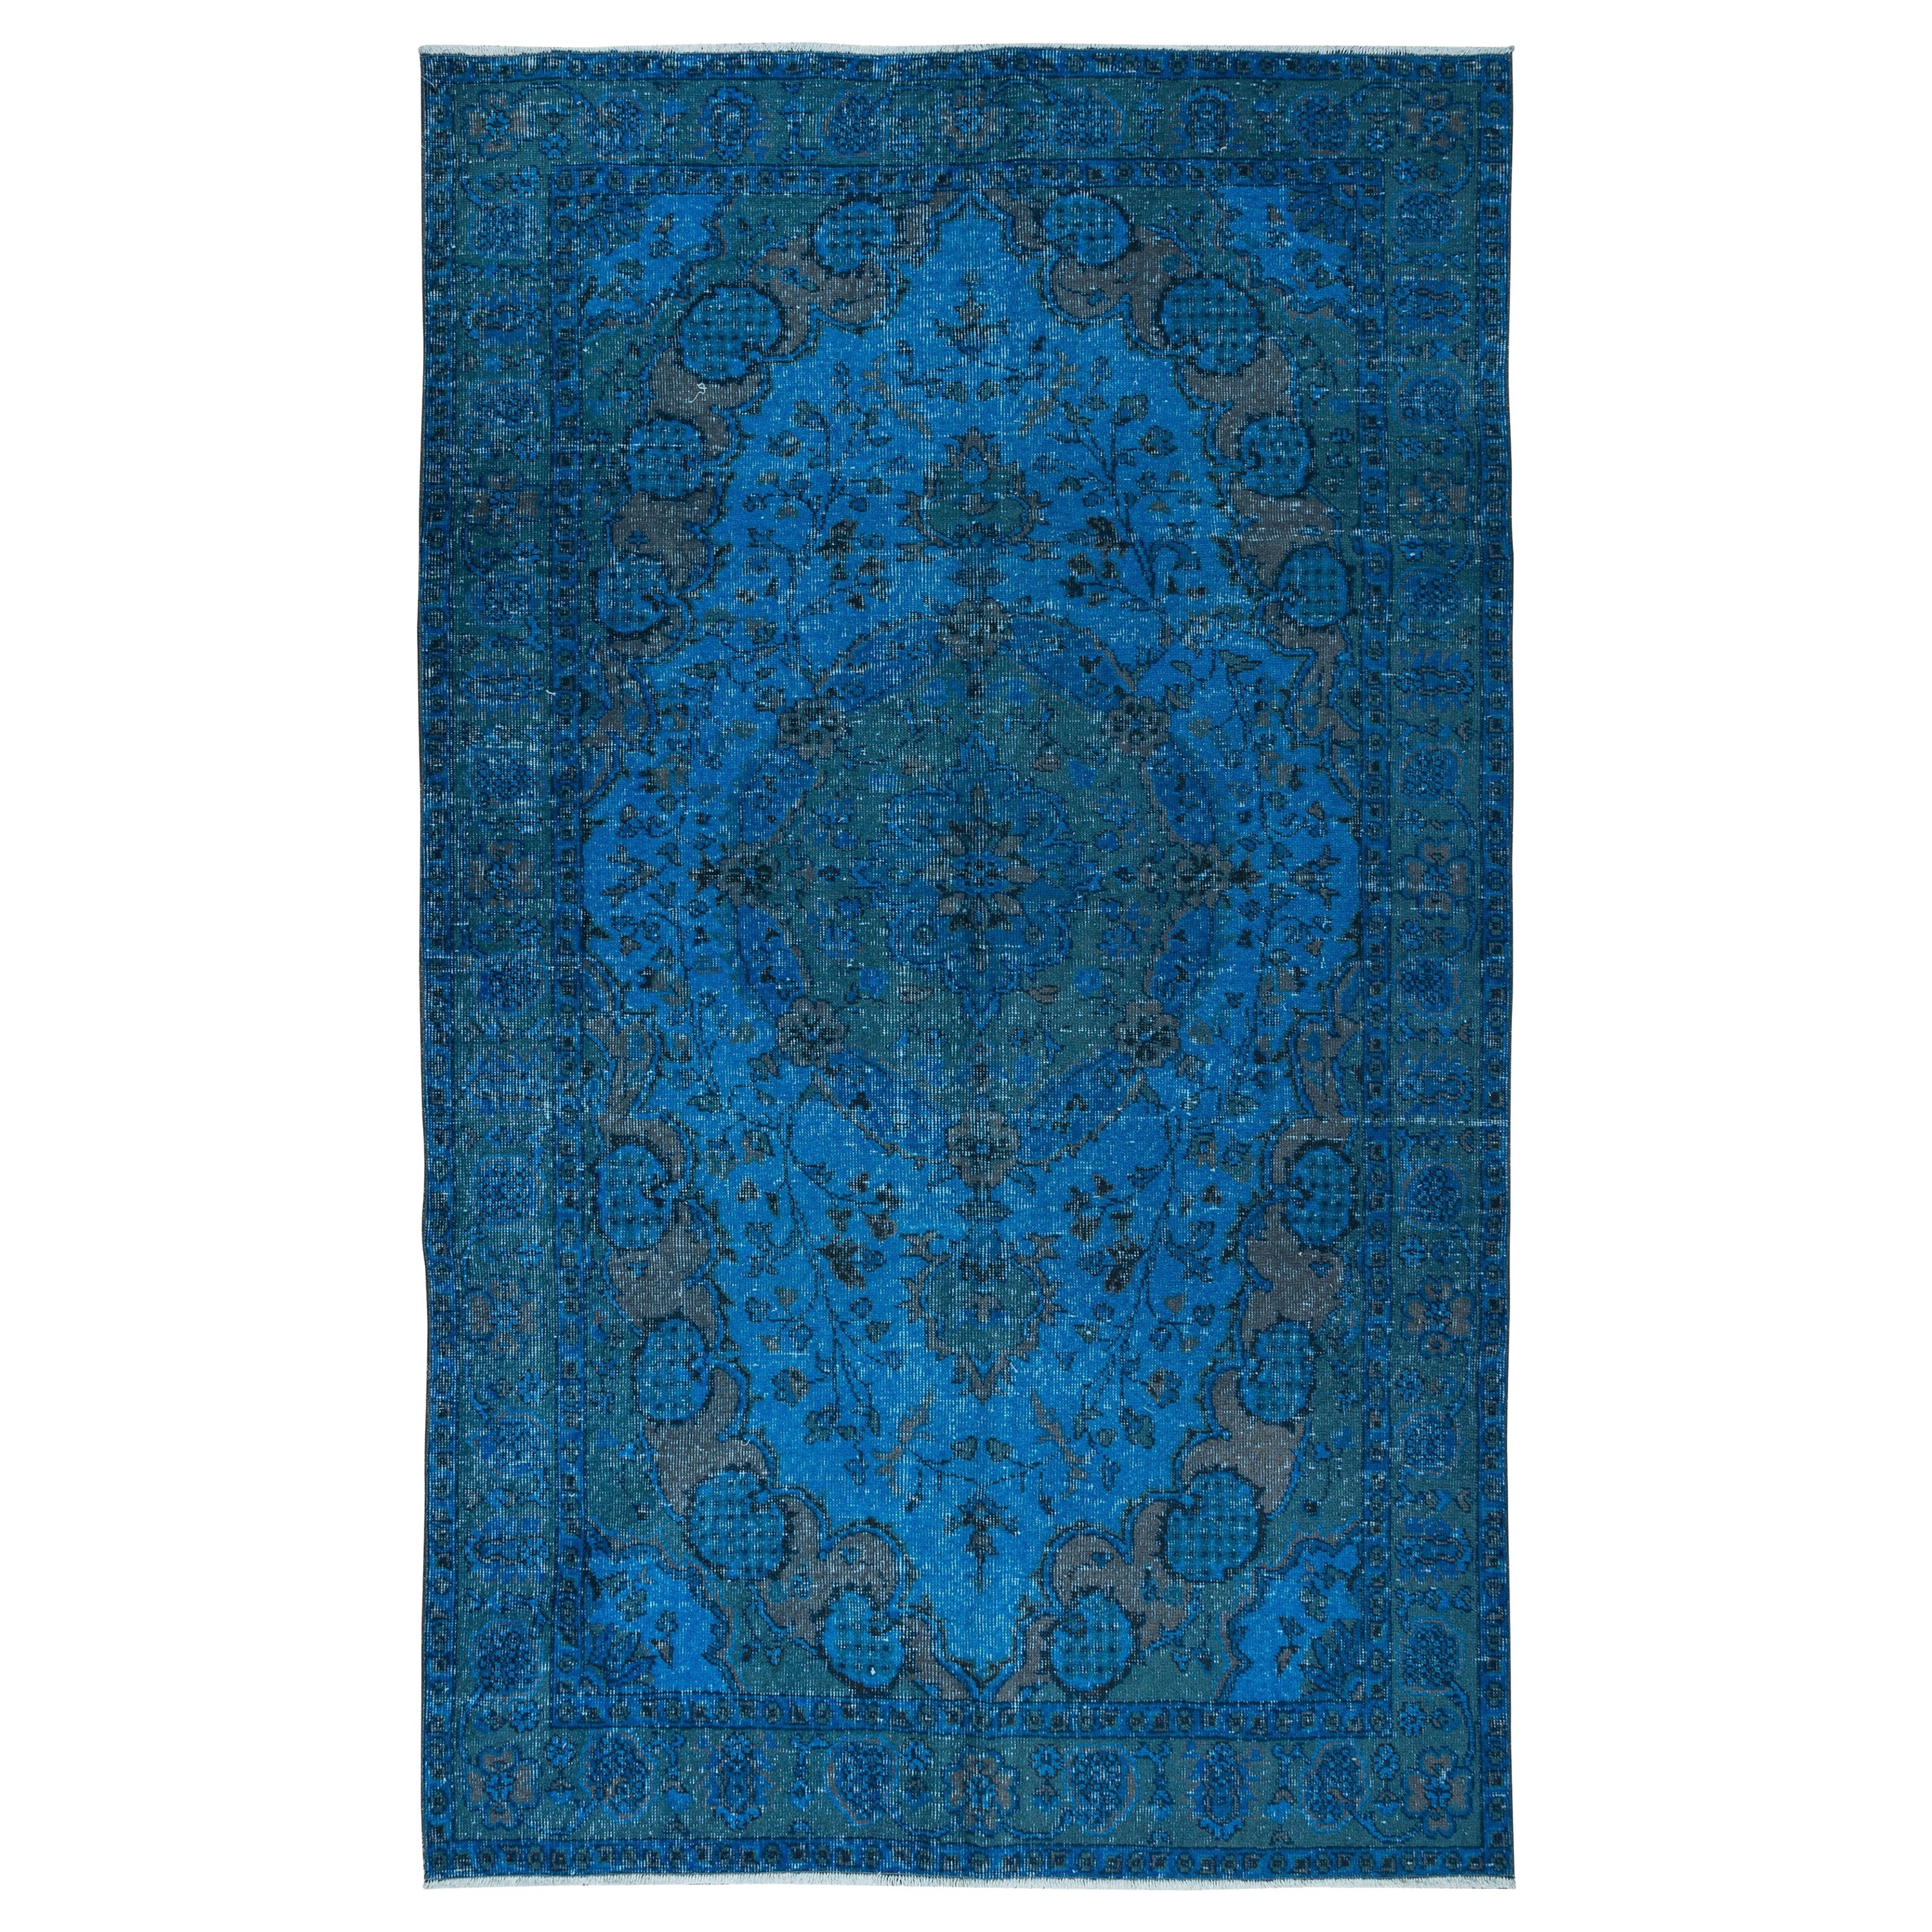 5.3x9 Ft Modern Blue Area Rug made of wool and cotton, Hand-Knotted in Turkey For Sale